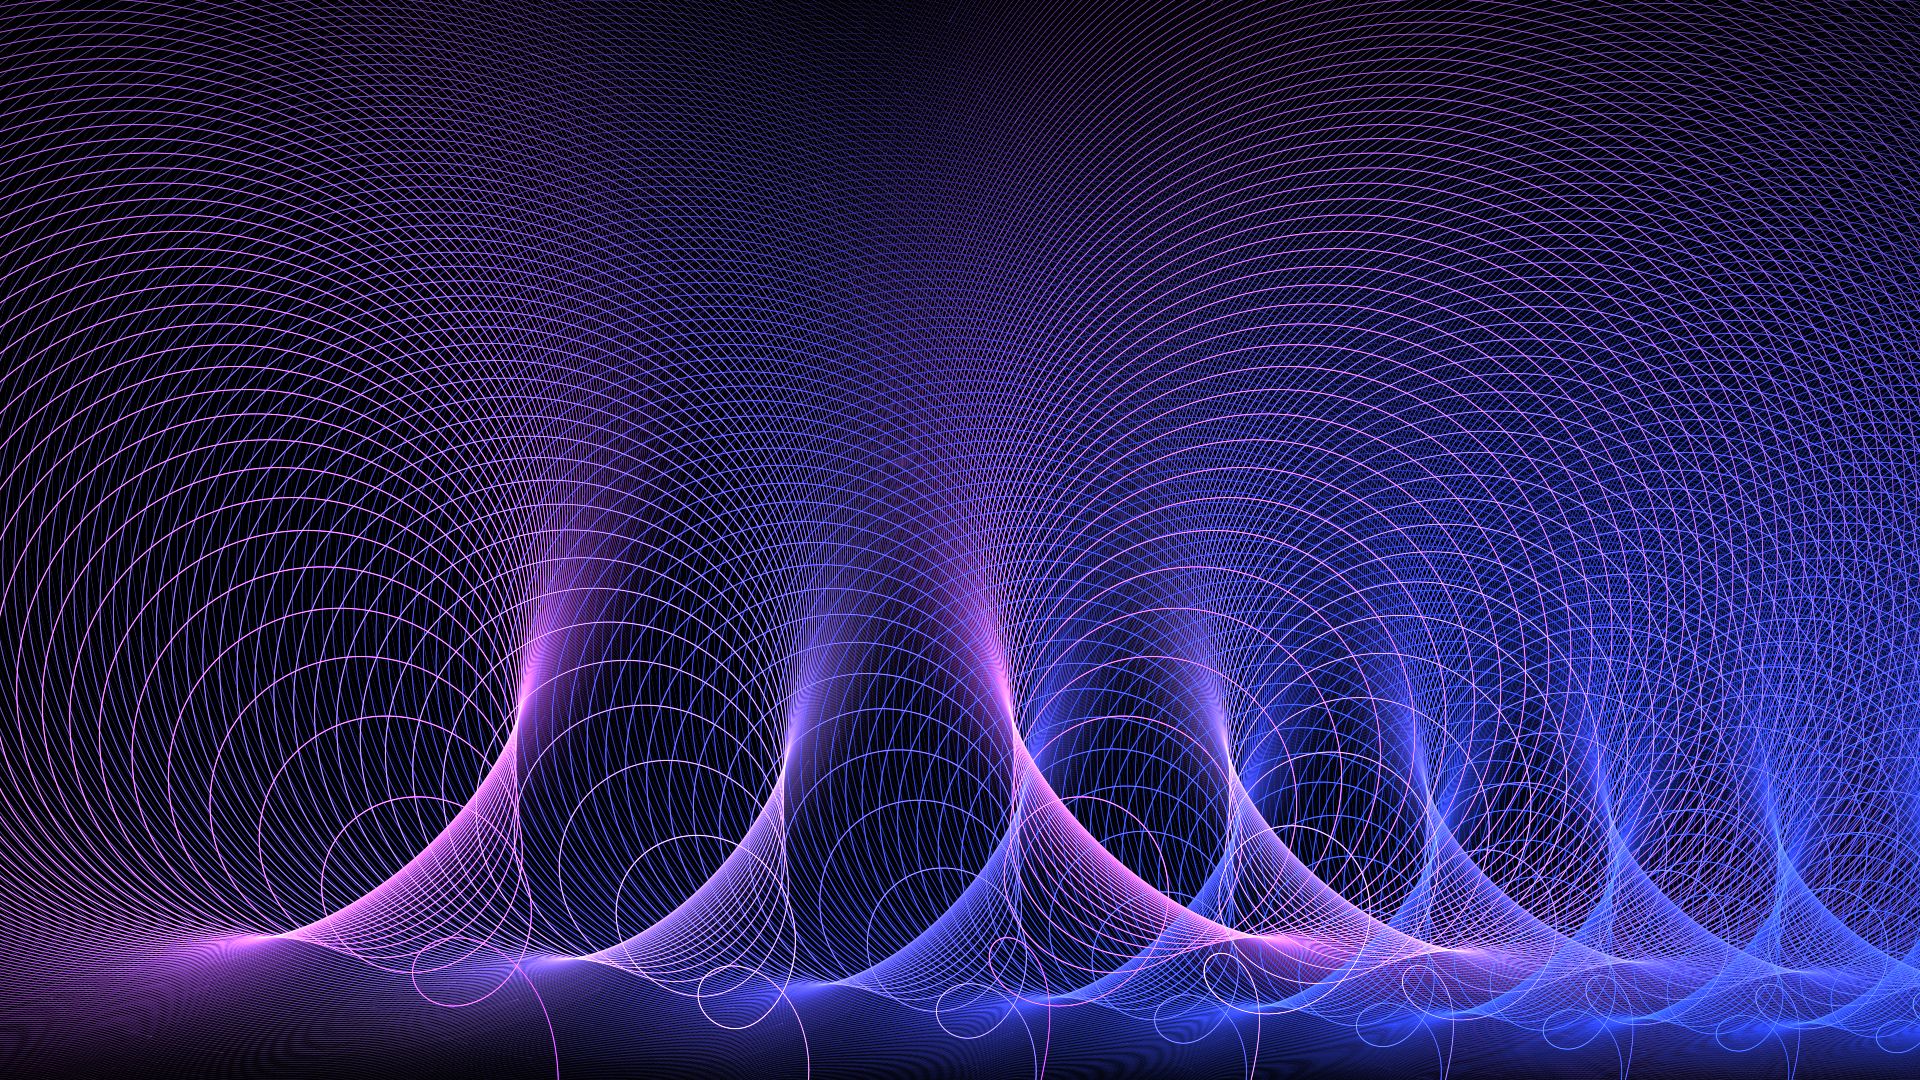 HD desktop wallpaper: Abstract, Fractal, Purple, Wave, Science, Energy  download free picture #865843